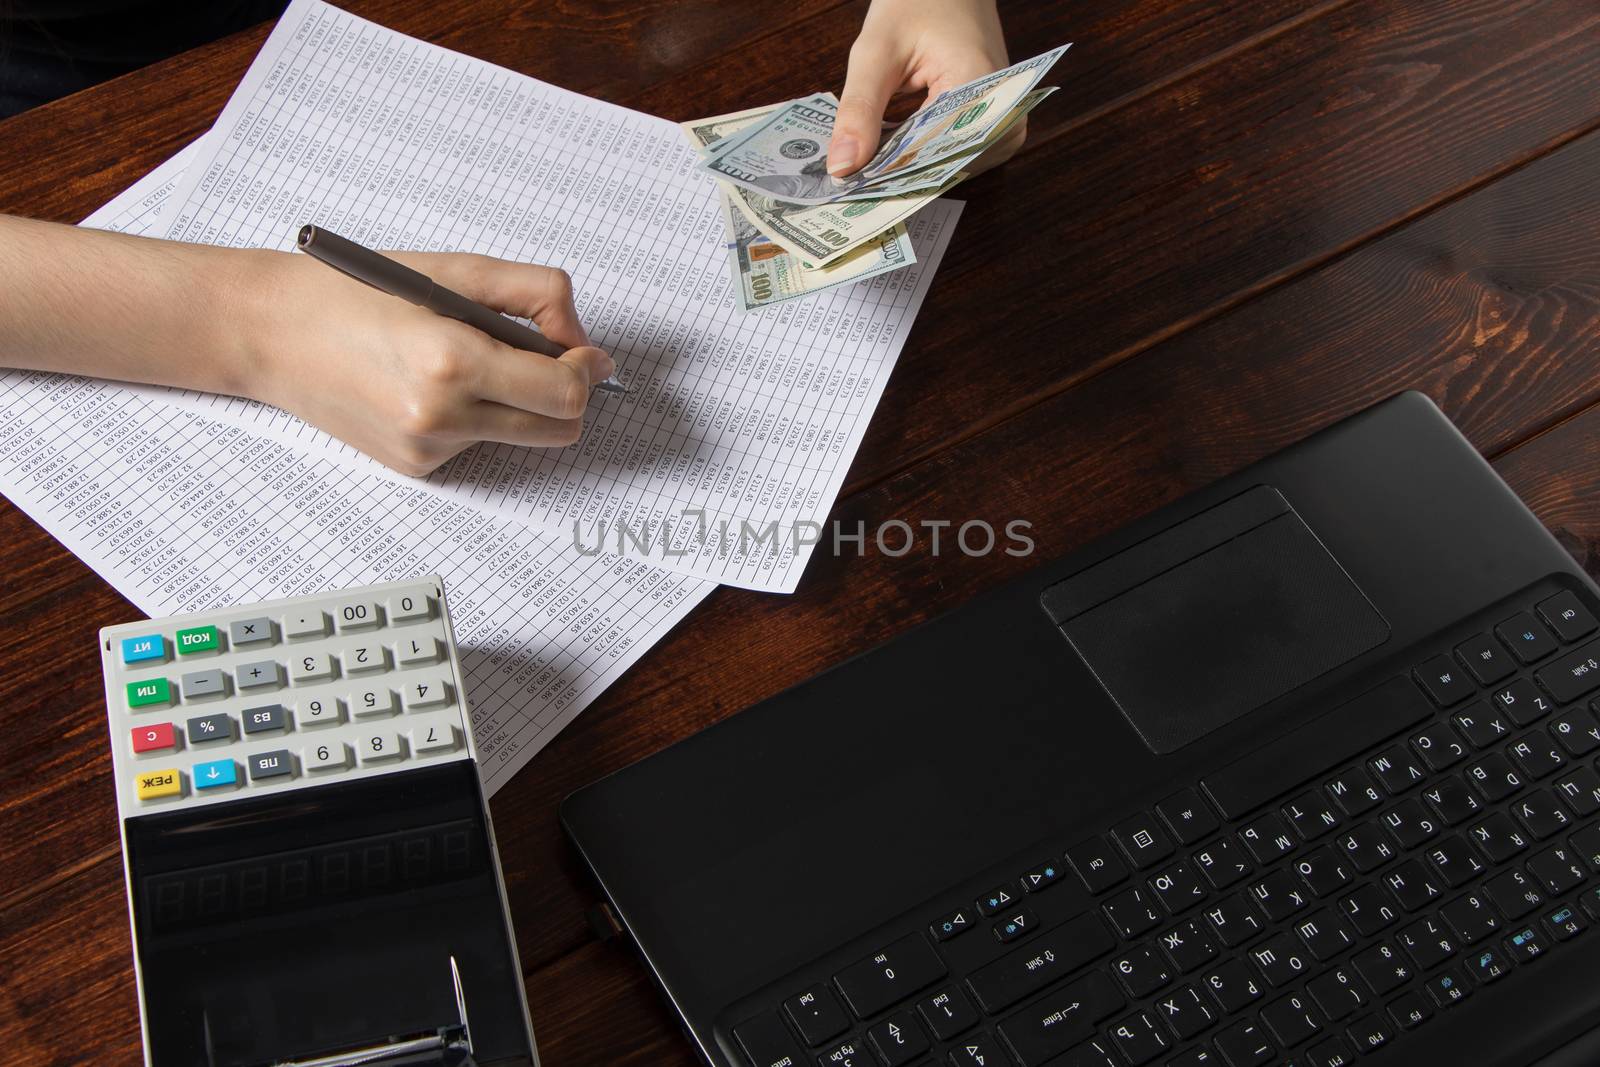 Obligation to pay wages and debts in the company.A cashier holds money dollars over an office work space with documents, a cash register, a phone, and a computer.Work in the office with finances